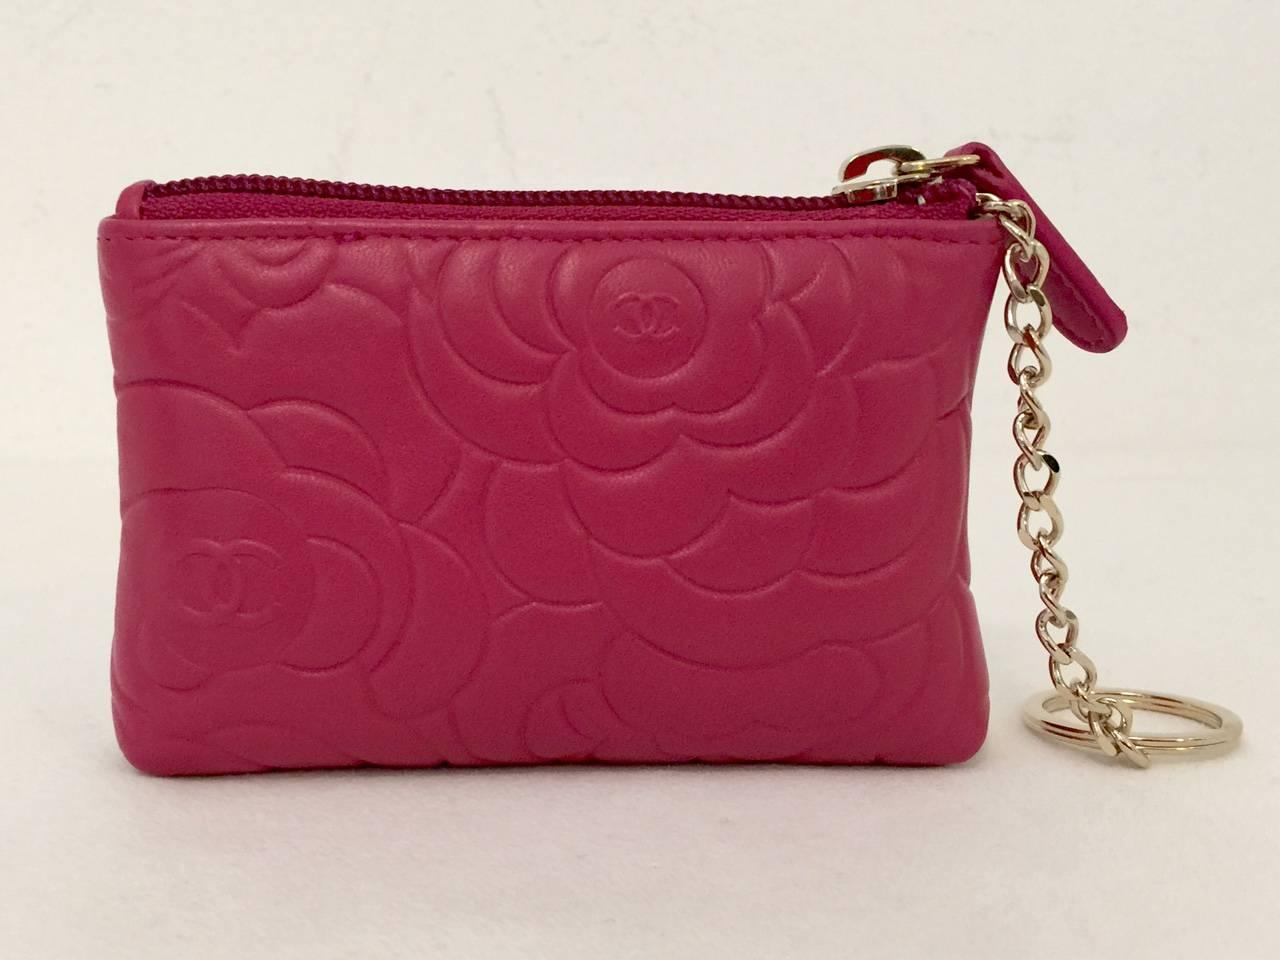 Chanel Leather O-Key Holder With Box is a must for any Chanelophile!  Features luxurious fuchsia leather stamped with the inimitable camellia and double 